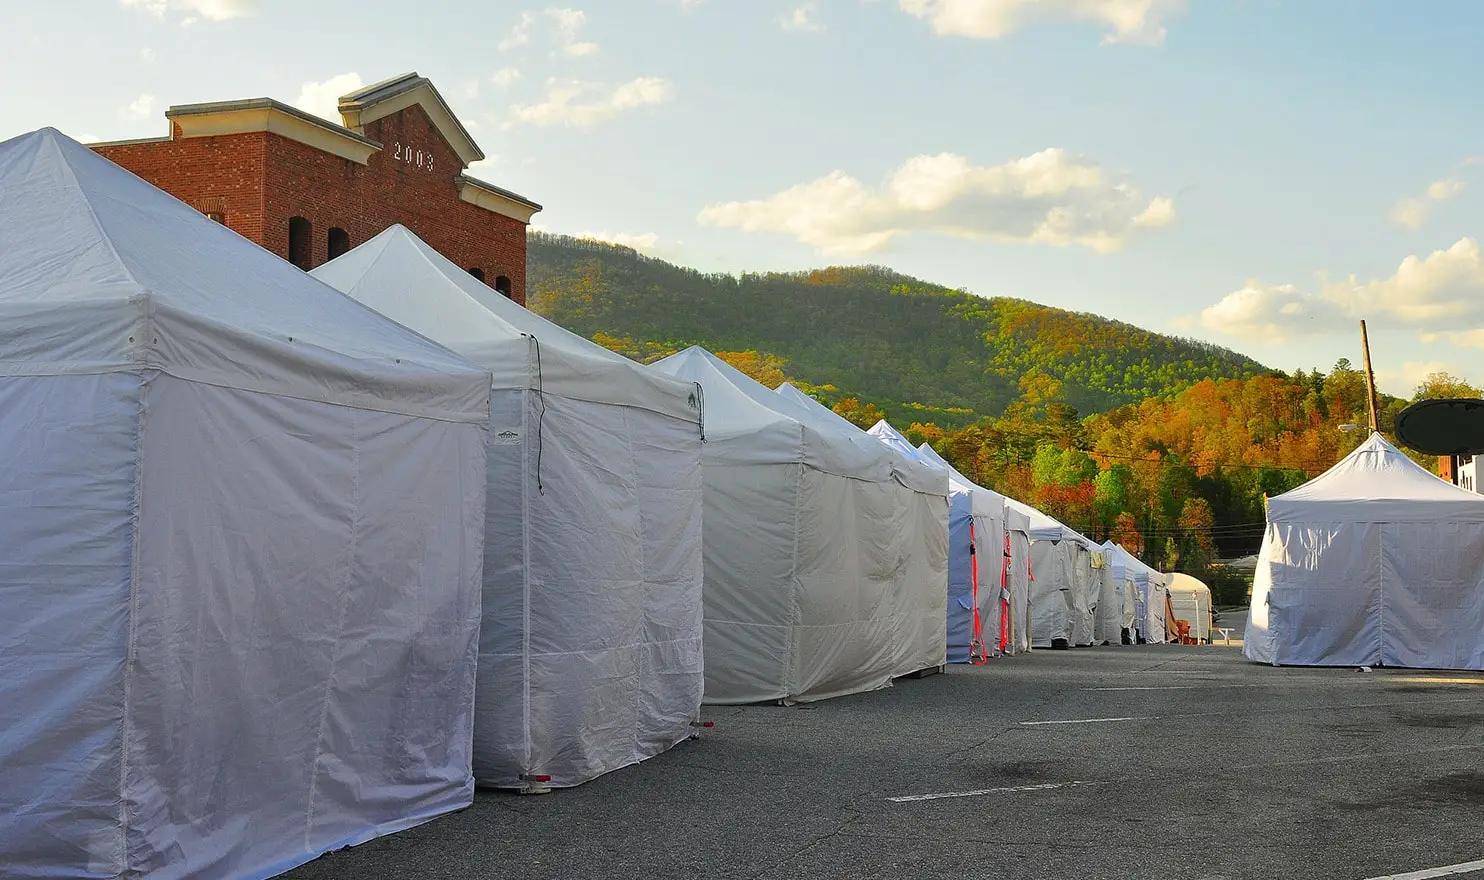 A row of white vendor booth tents at an outdoor craft market.